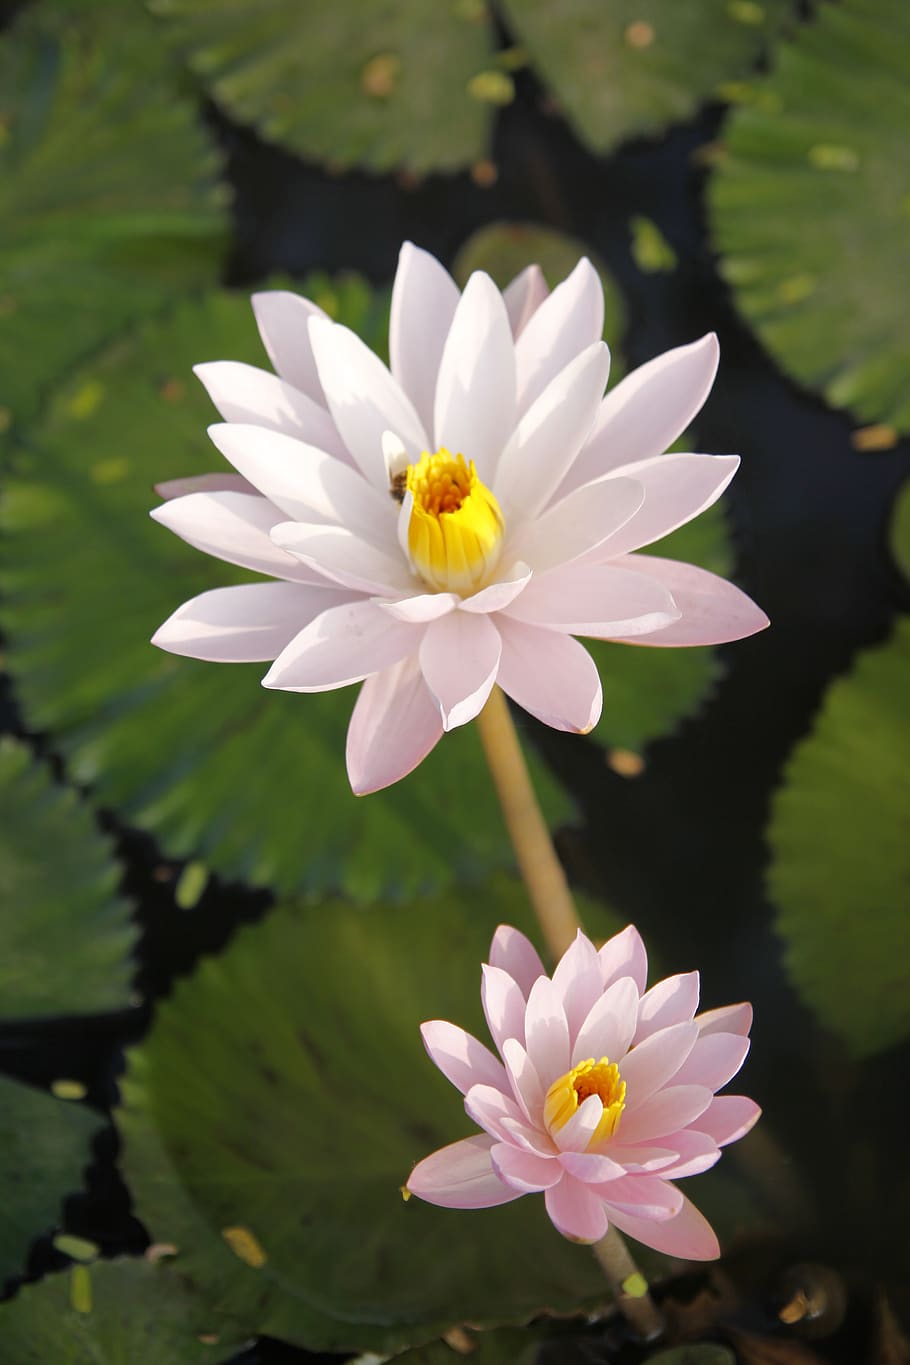 water lily, sung, pond, pink, flowers, thailand, flowering plant, flower, vulnerability, petal